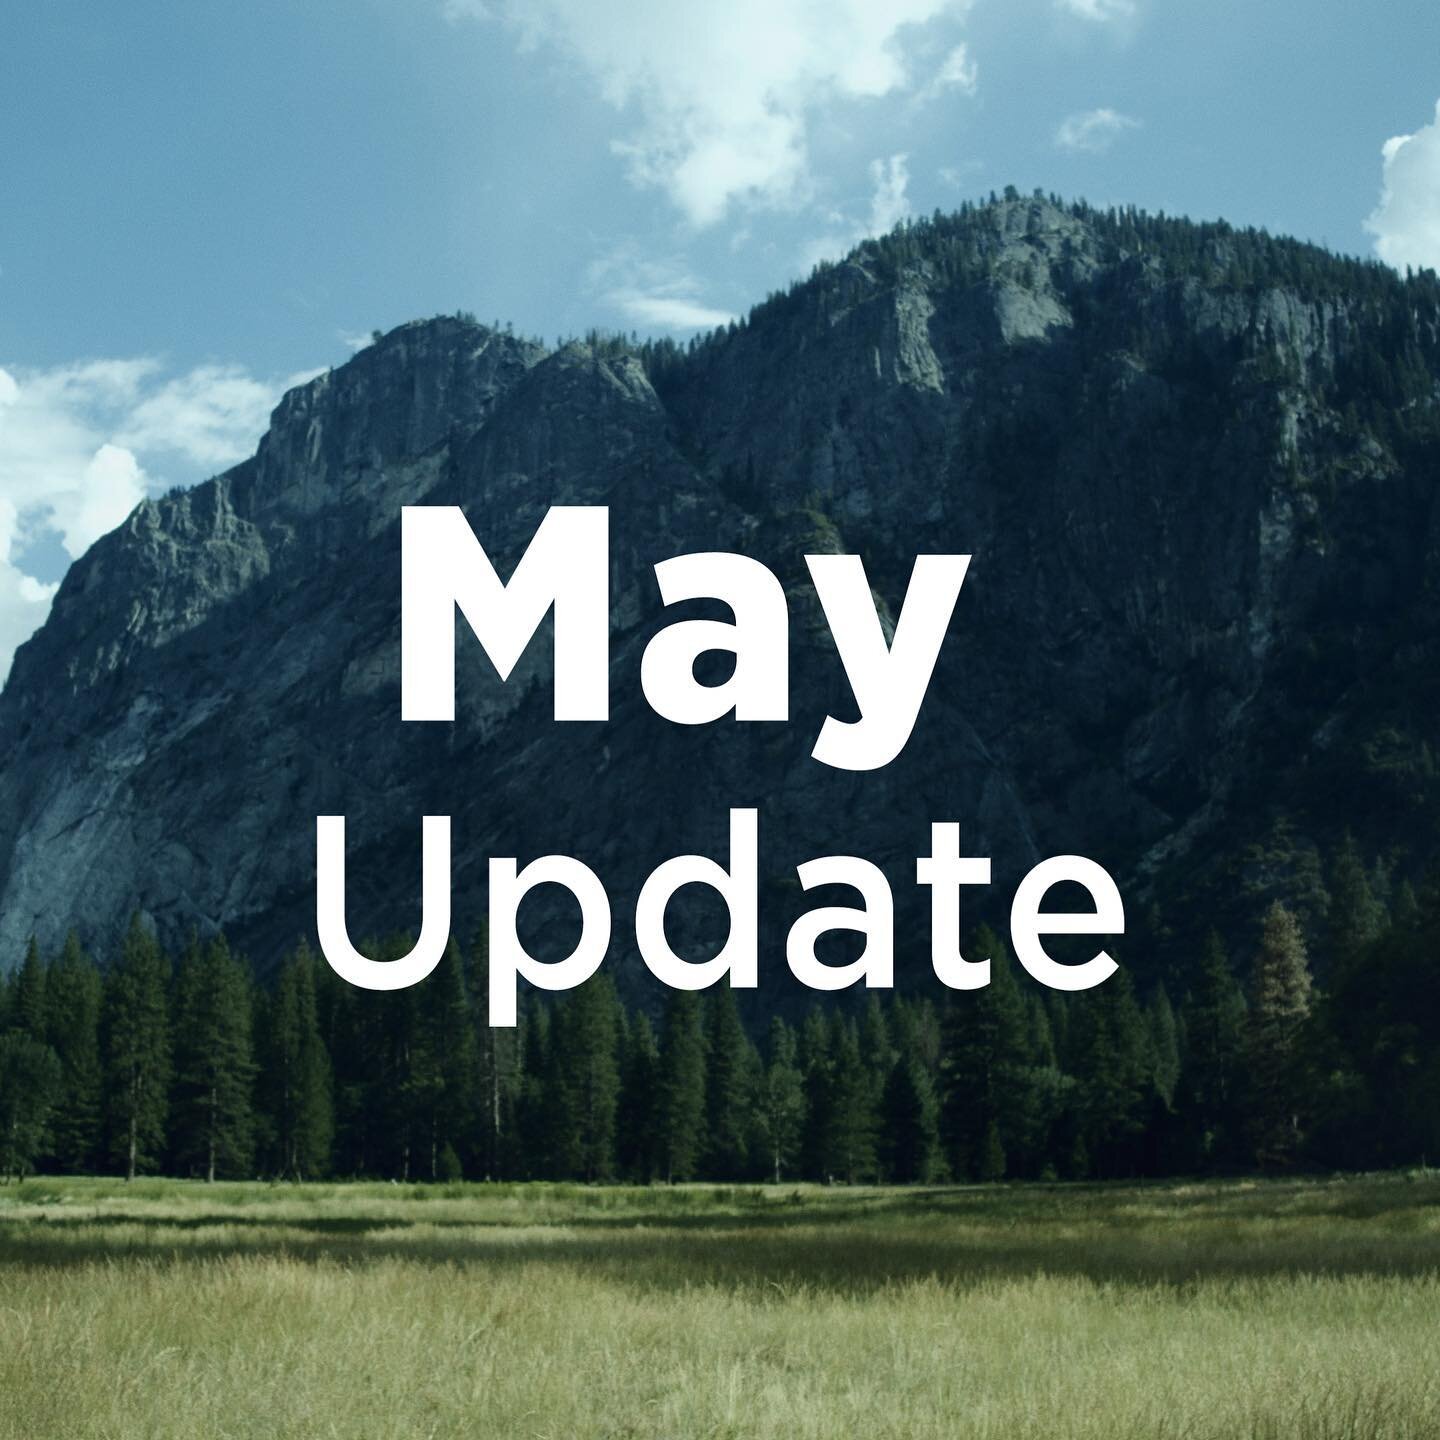 The latest pastors' update is live and ready for your perusal! Check it out to stay up-to-date on church activities, events, and prayer requests. We've also included a helpful devotional for you to think about this month. Thank you so much! It is an 